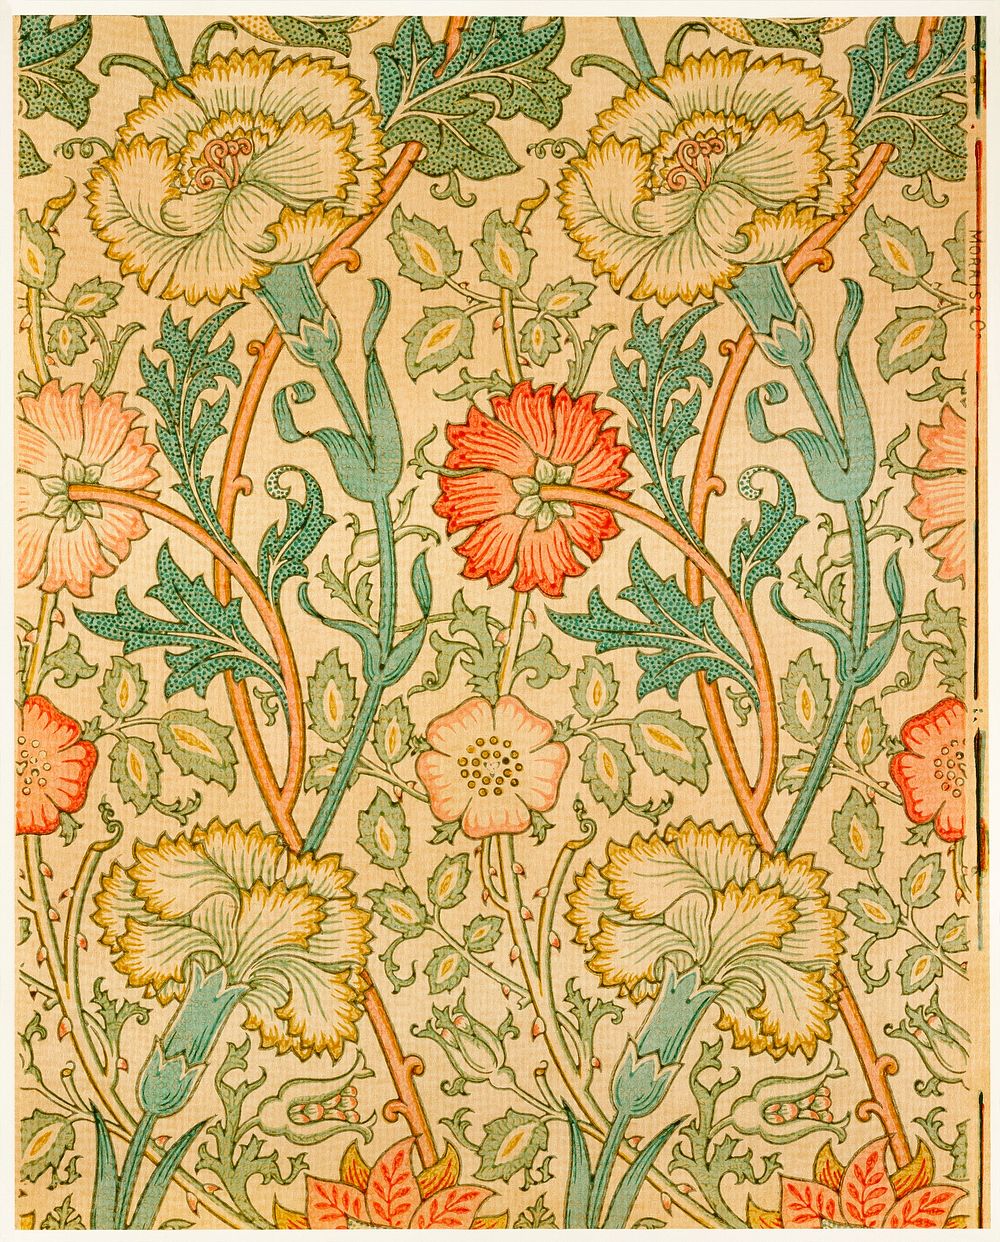 William Morris's (1834-1896) Pink and Rose famous pattern. Original from The MET Museum. Digitally enhanced by rawpixel.